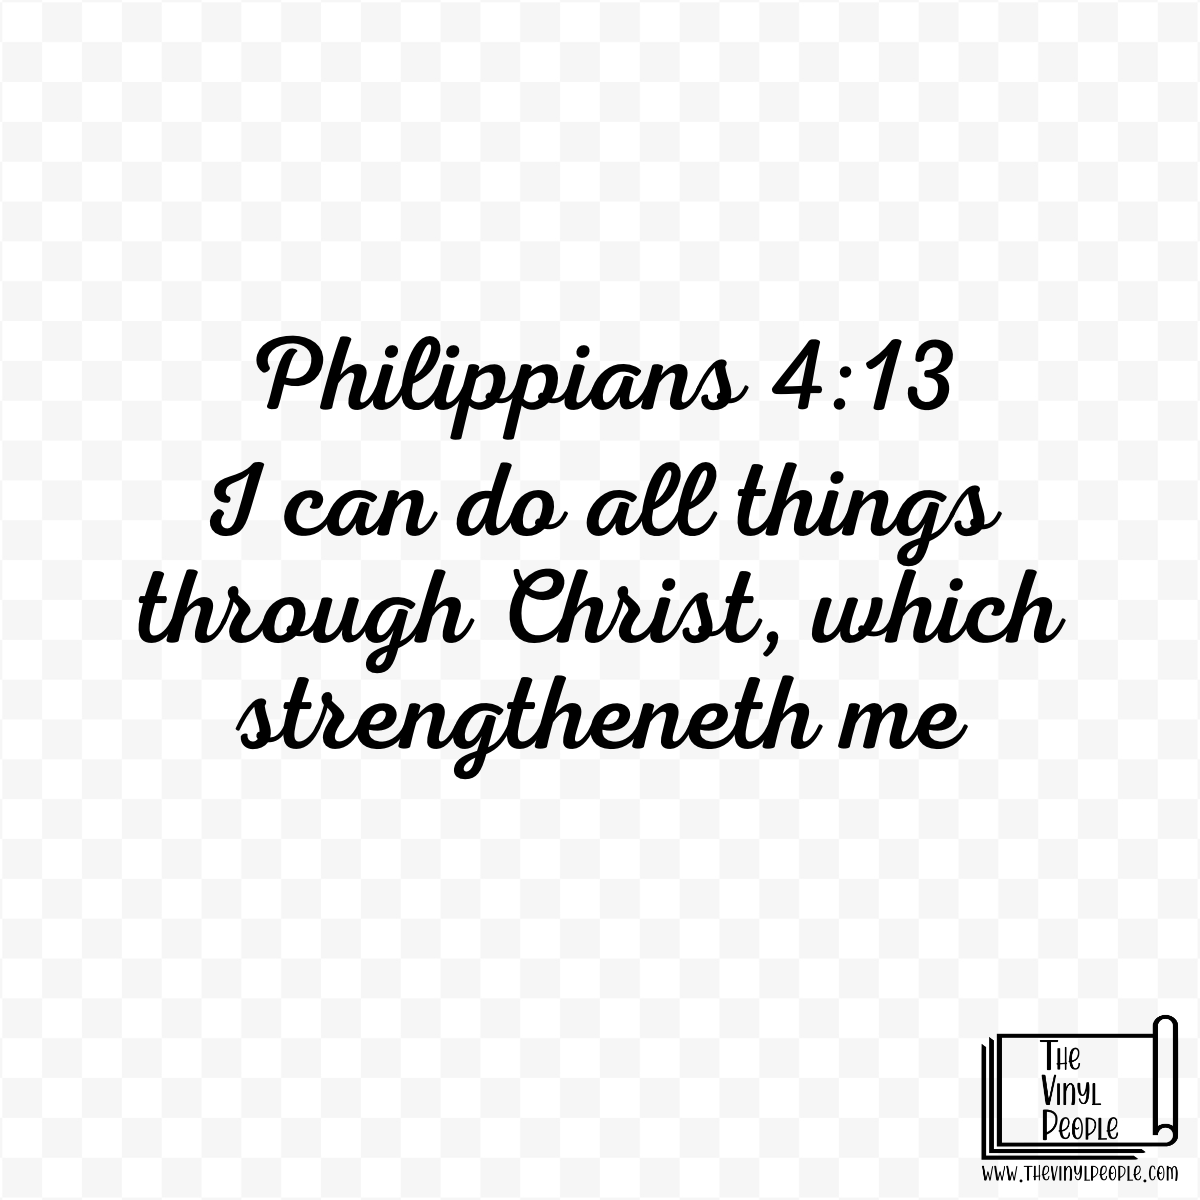 Custom Decal for Brittany - Philippians 4:13 (black)